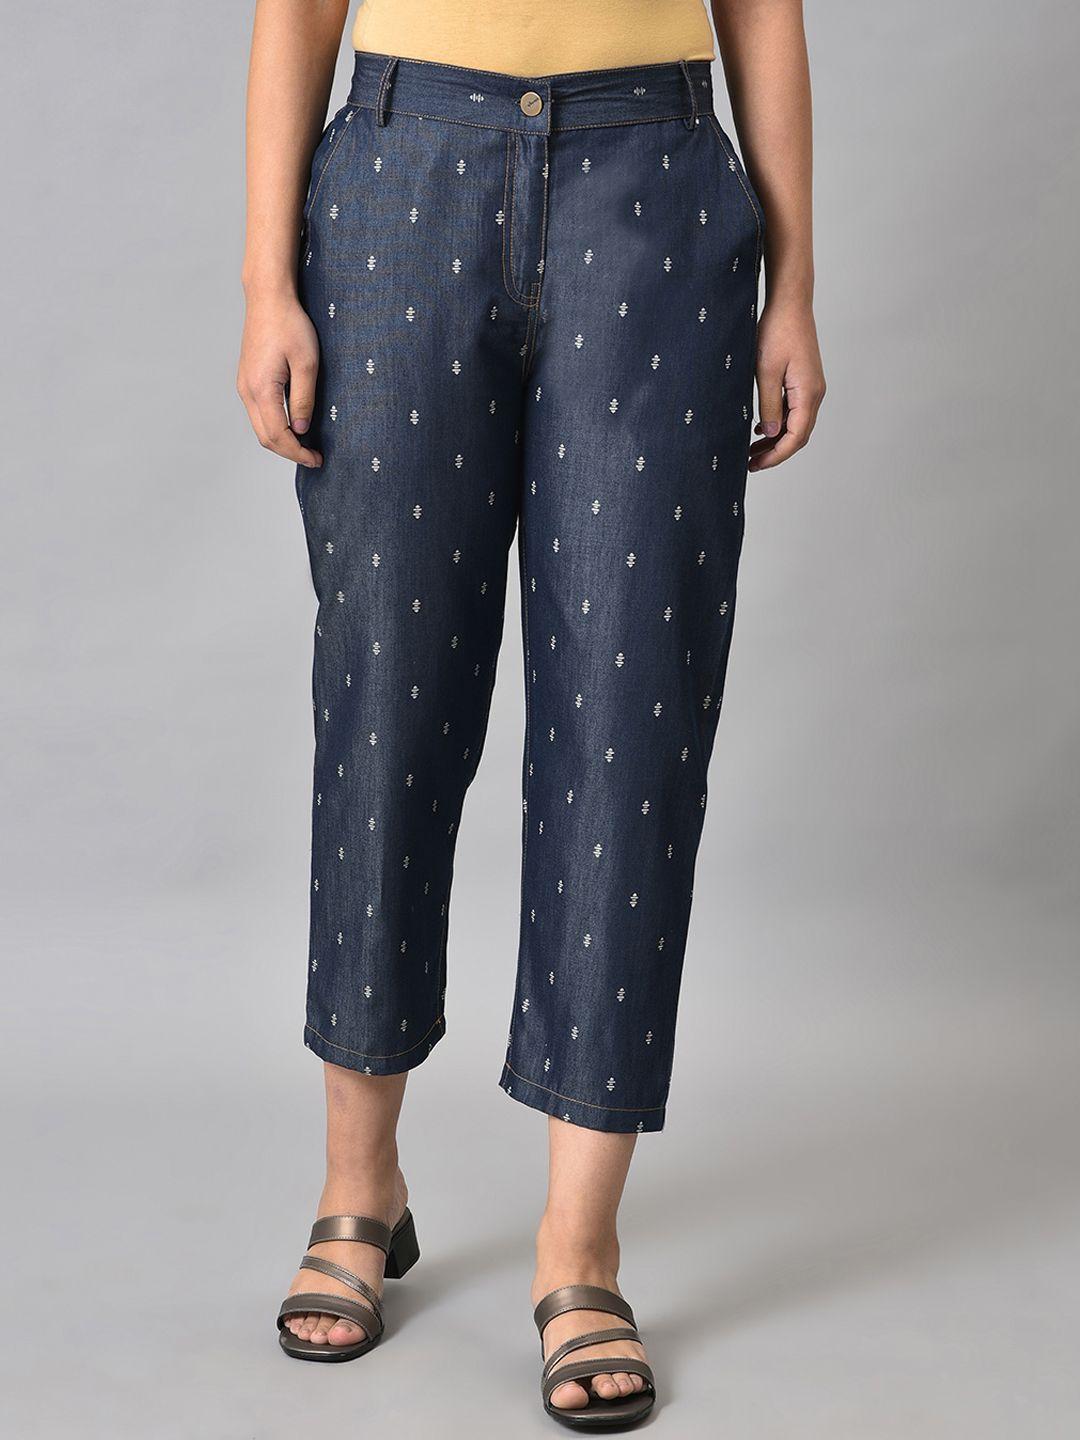 elleven women polka dots printed mid-rise ethnic trousers